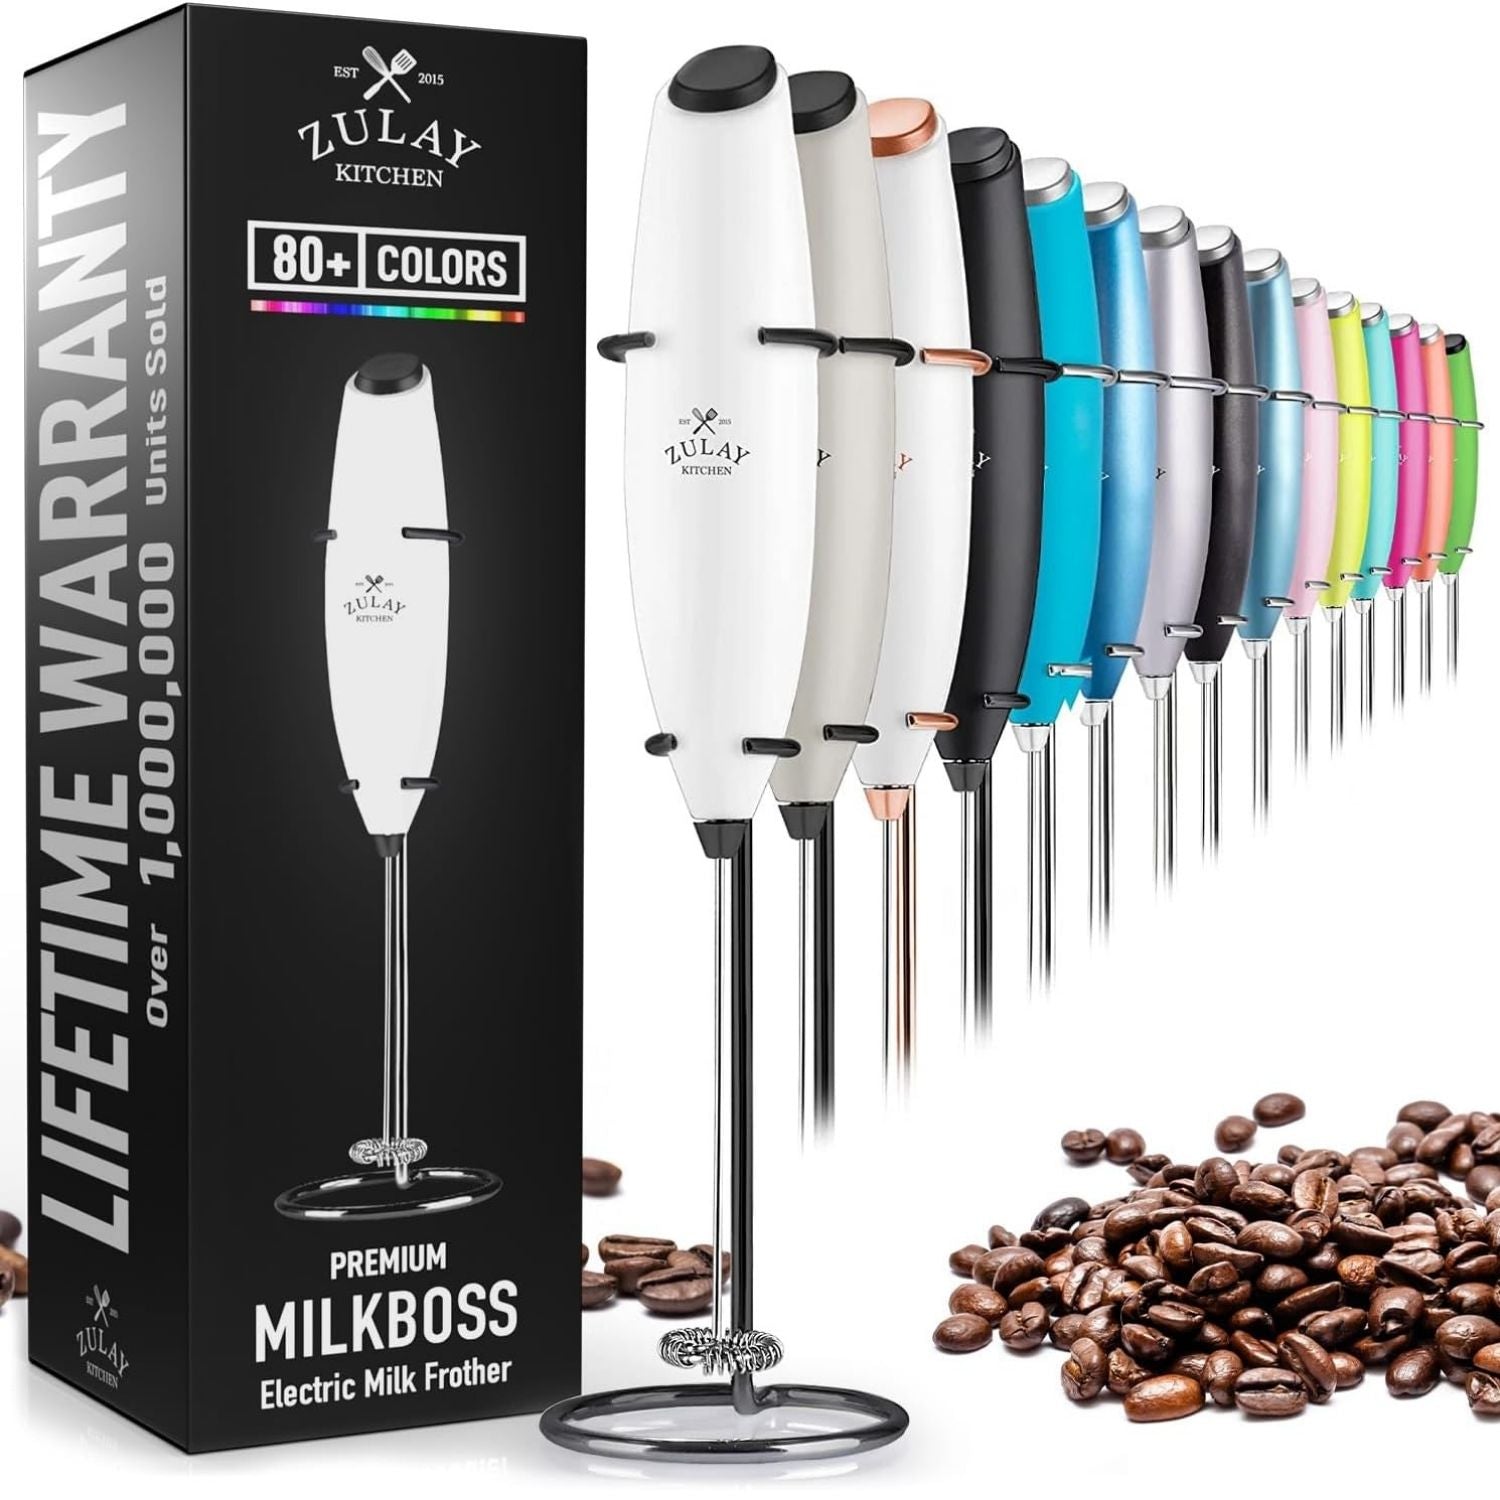 How To Use The Zulay Kitchen Milk Boss Handheld Frother! 